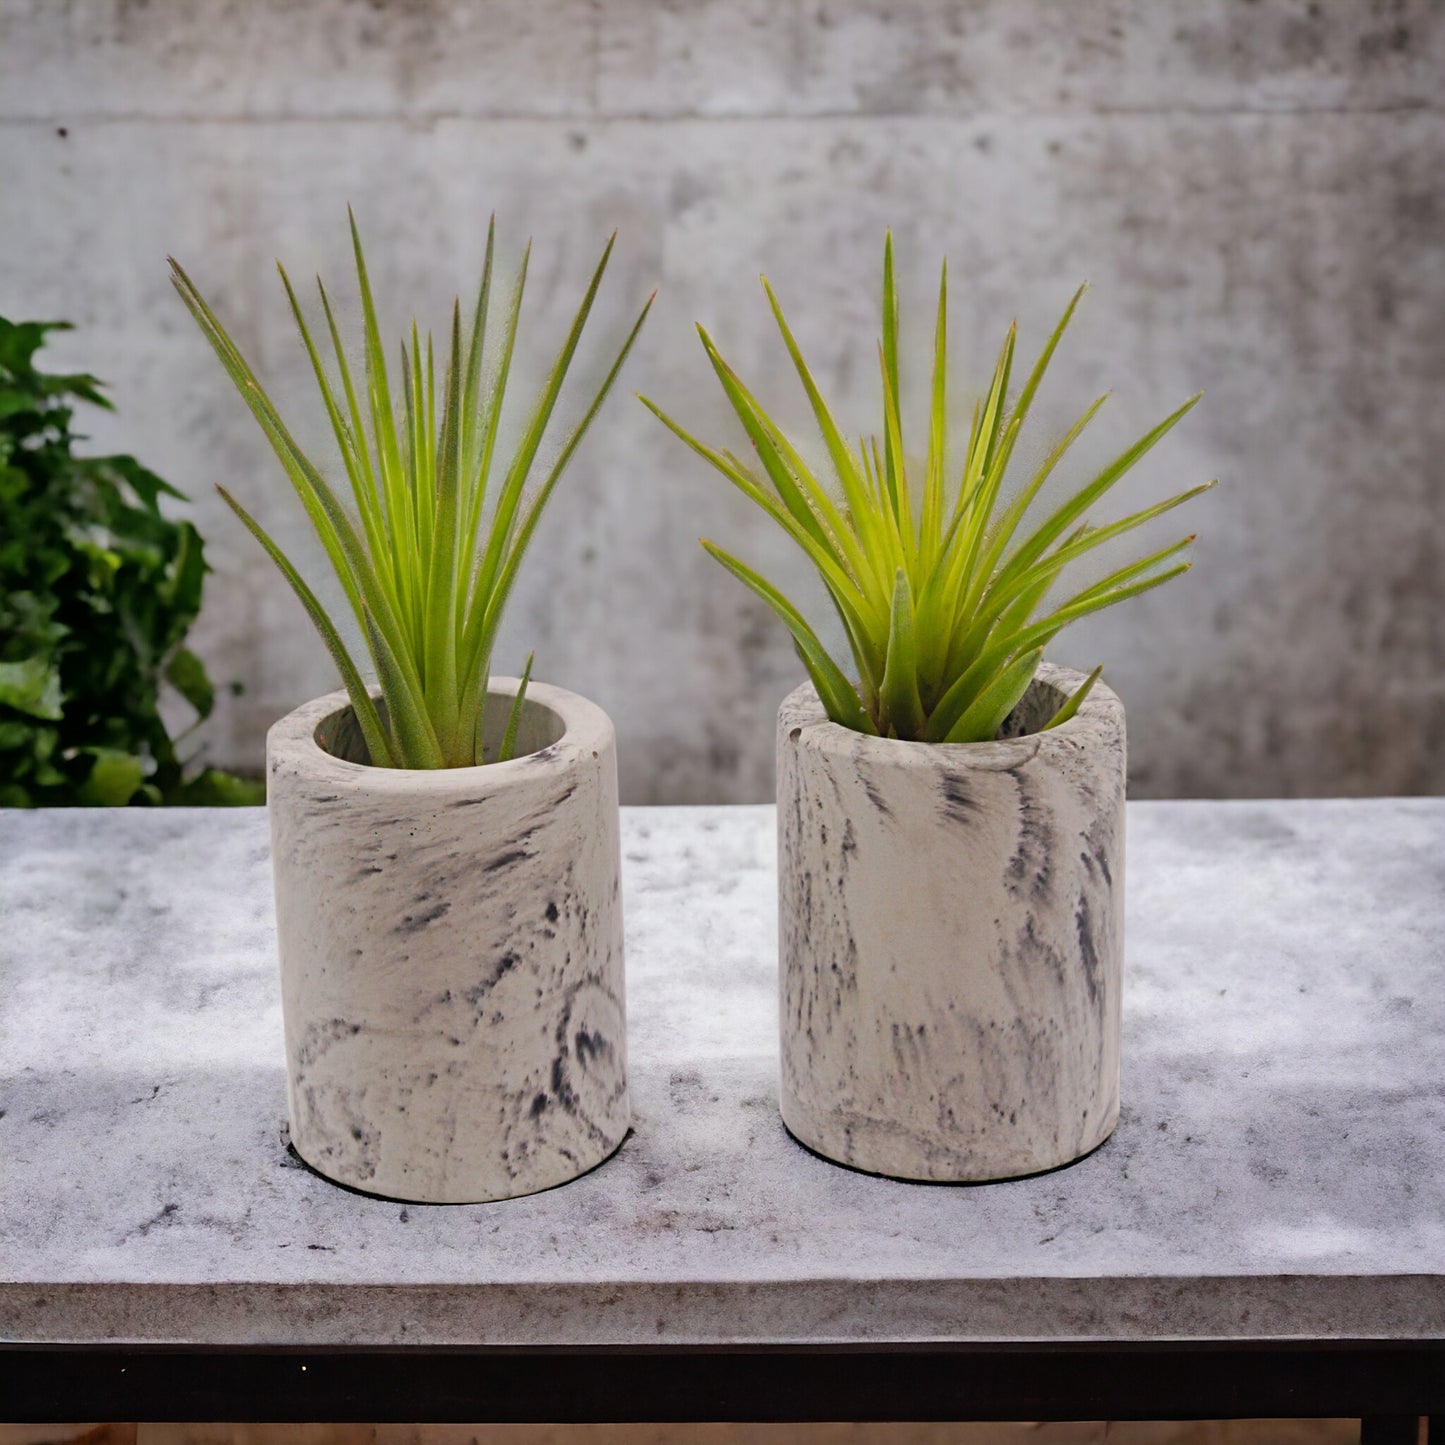 Black & grey marbled cement airplant pots